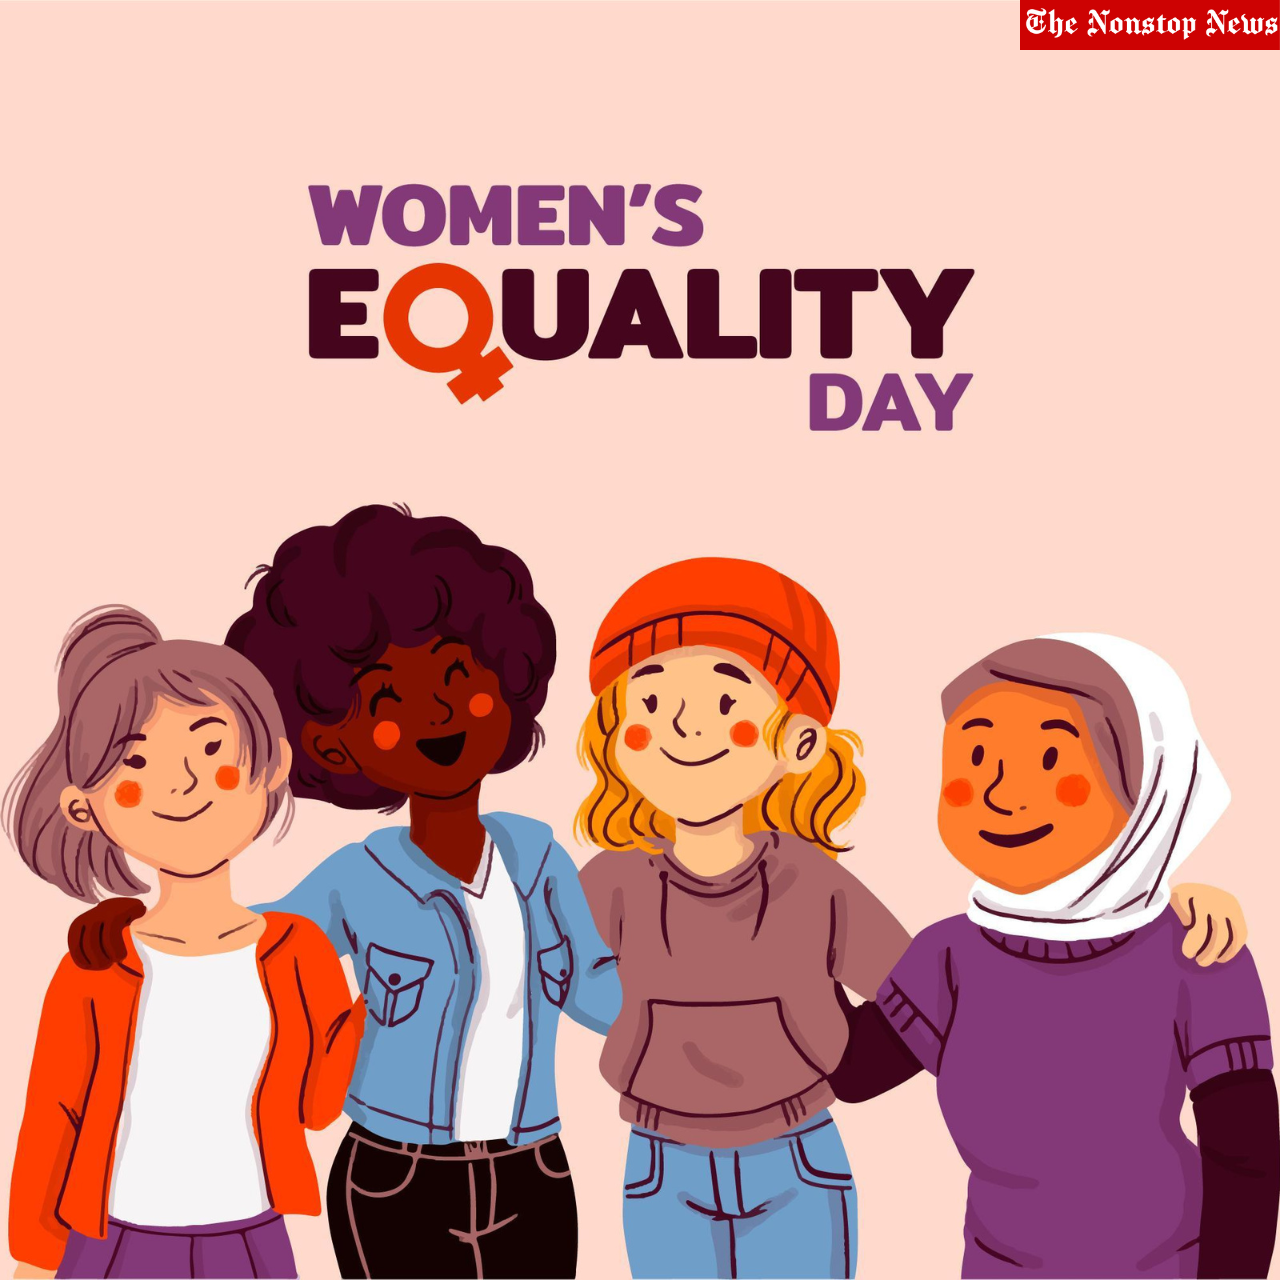 Women's Equality Day 2022: Current Theme, Quotes, Messages, Images, Slogans, Captions, and Social Media Posts to share